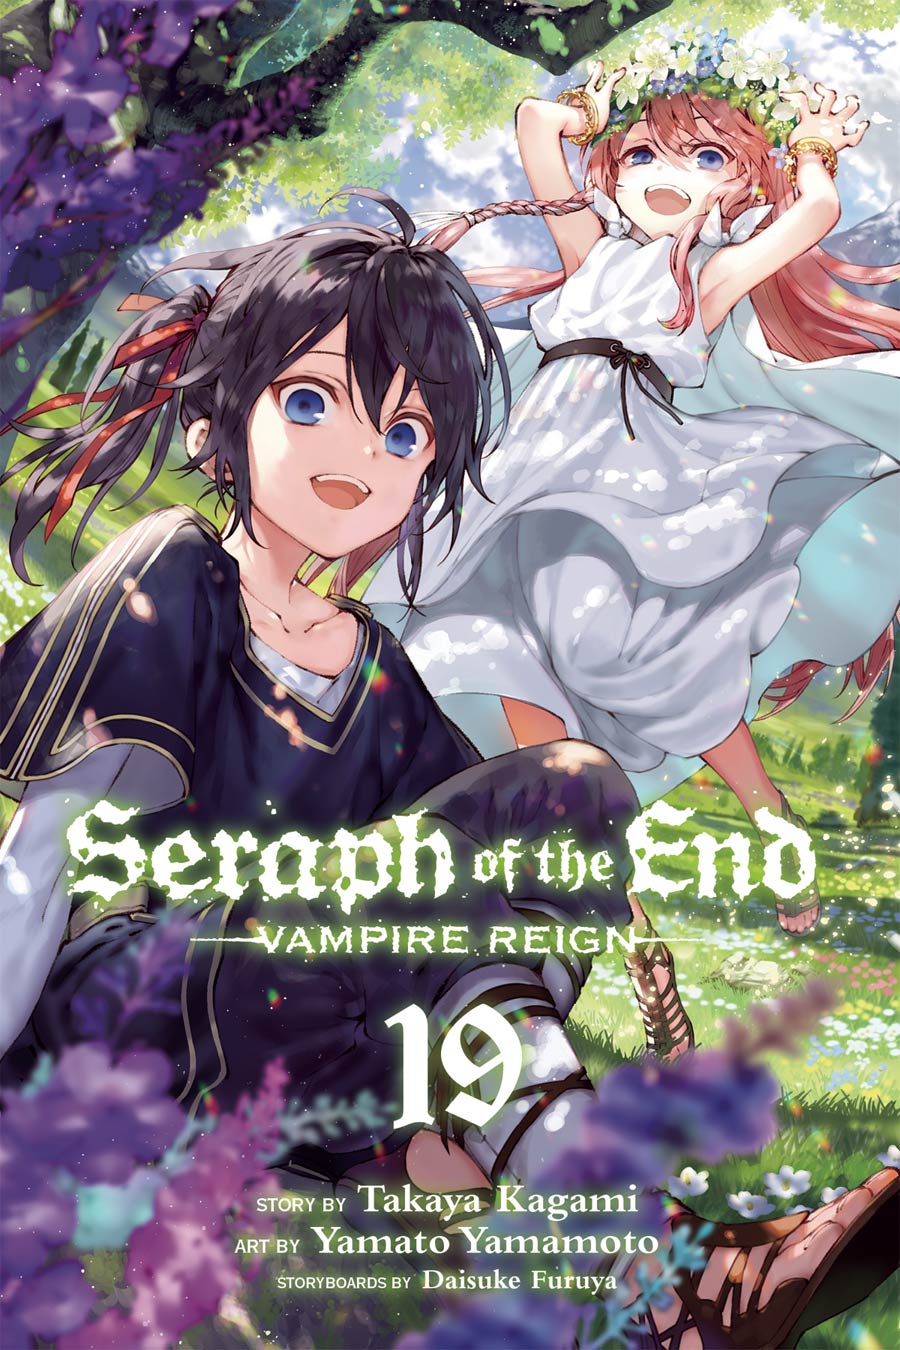 Seraph Of The End Vampire Reign Vol 19 TP